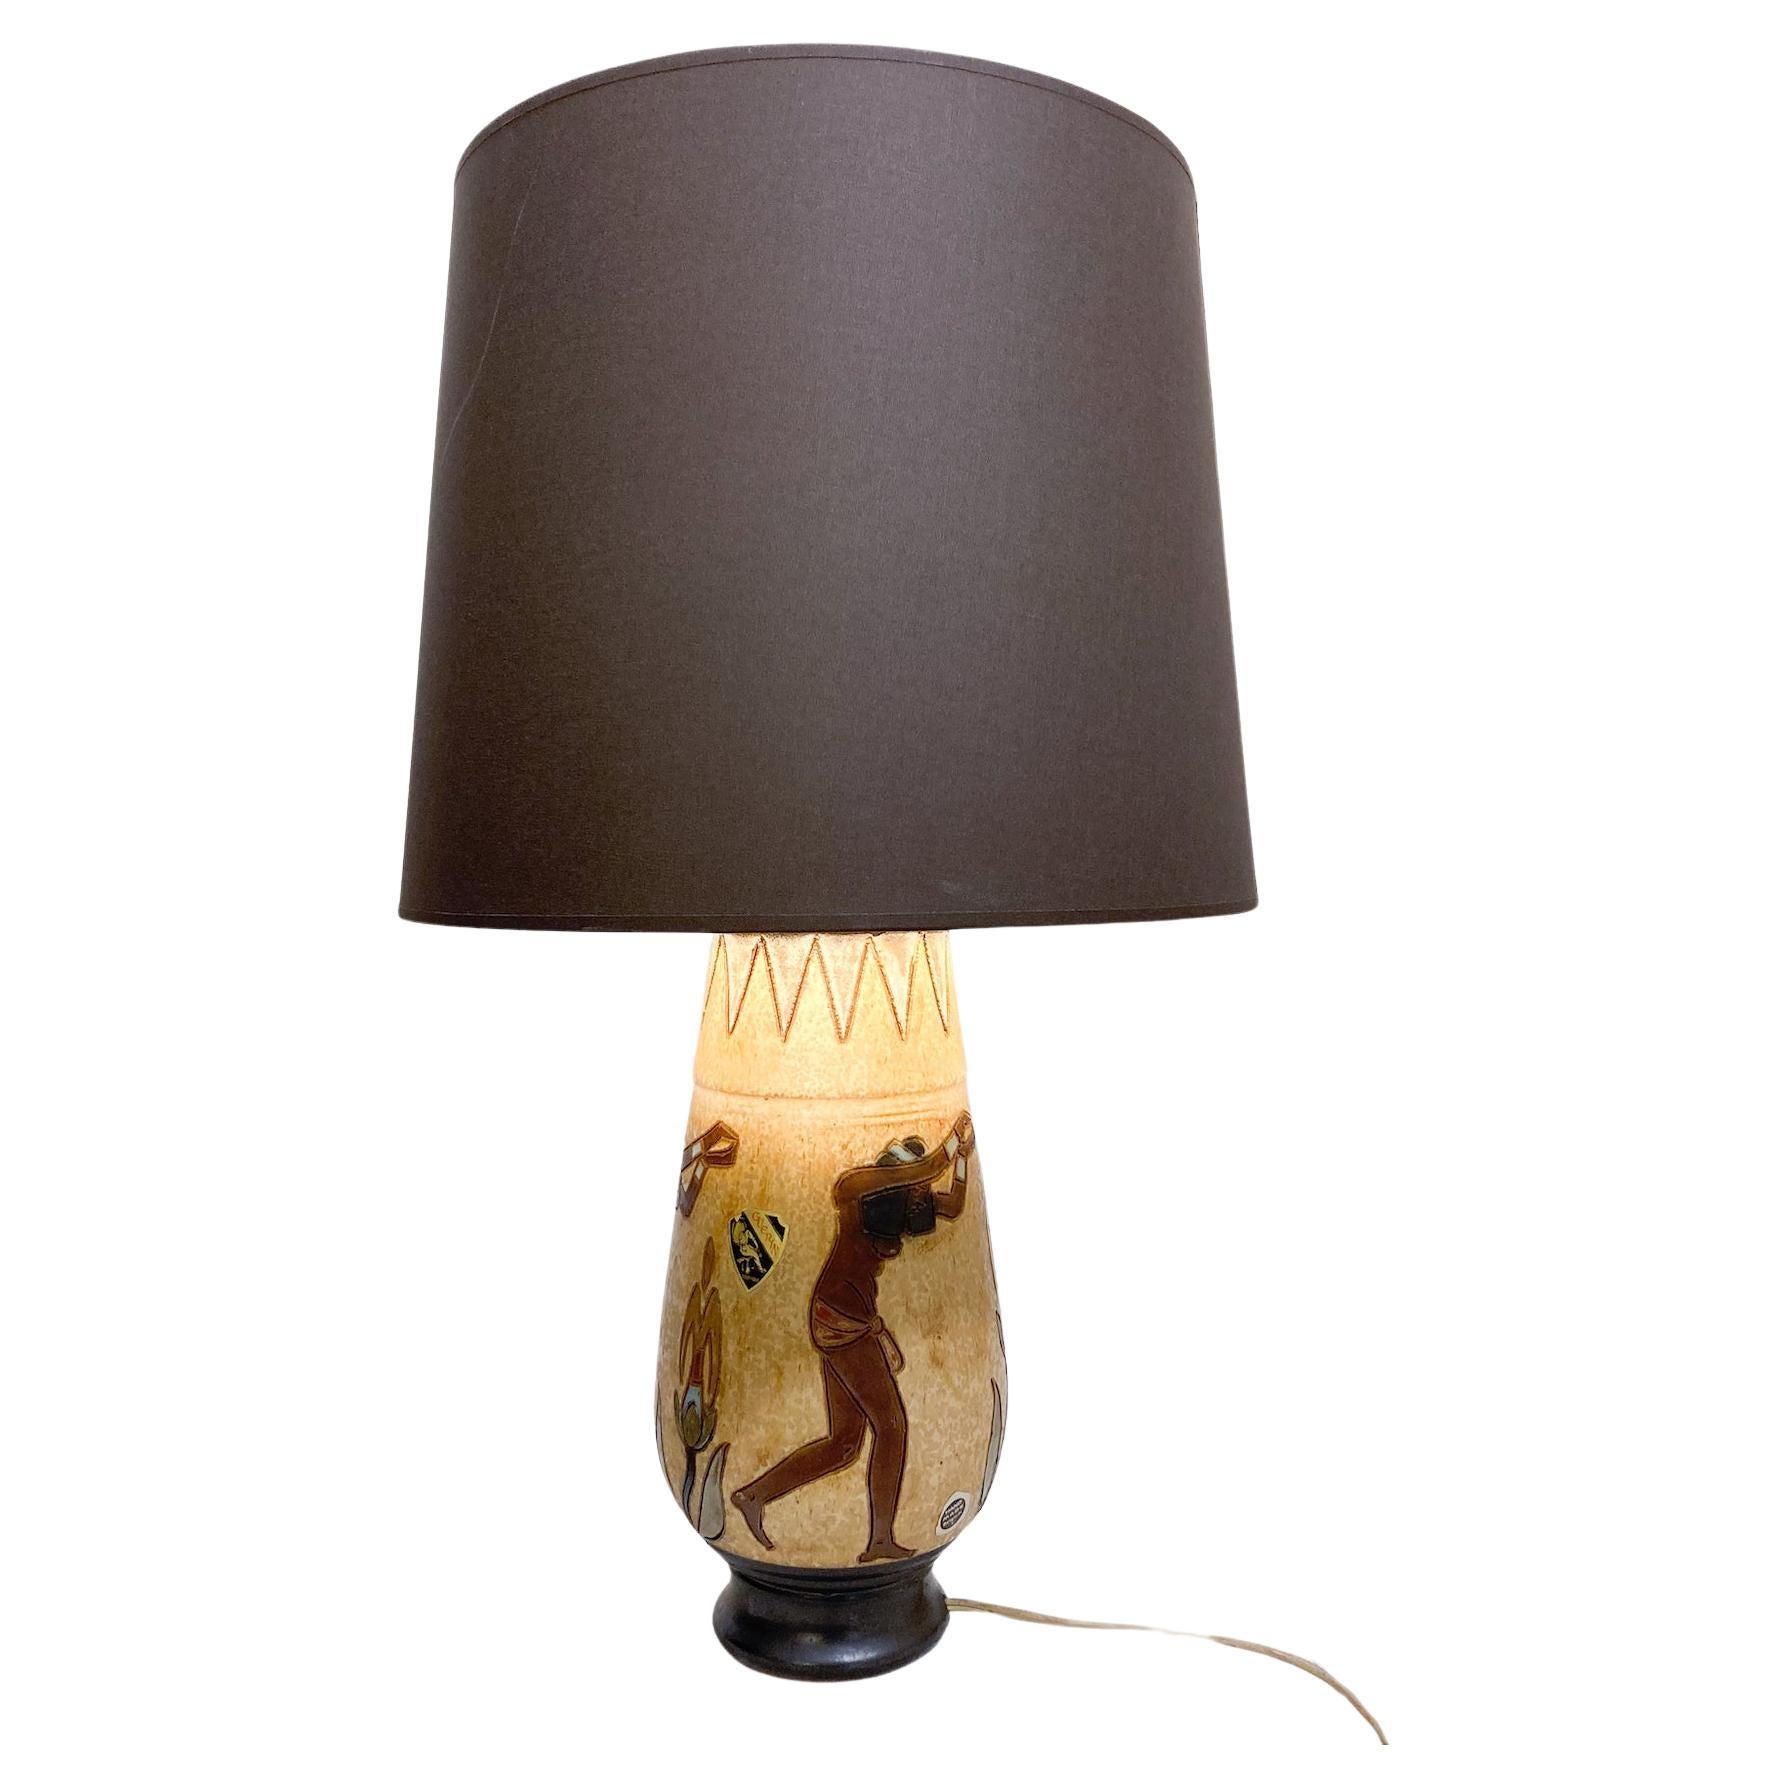 Mid-Century Modern Ceramic Table Lamp by Roger Guérin, Belgium For Sale